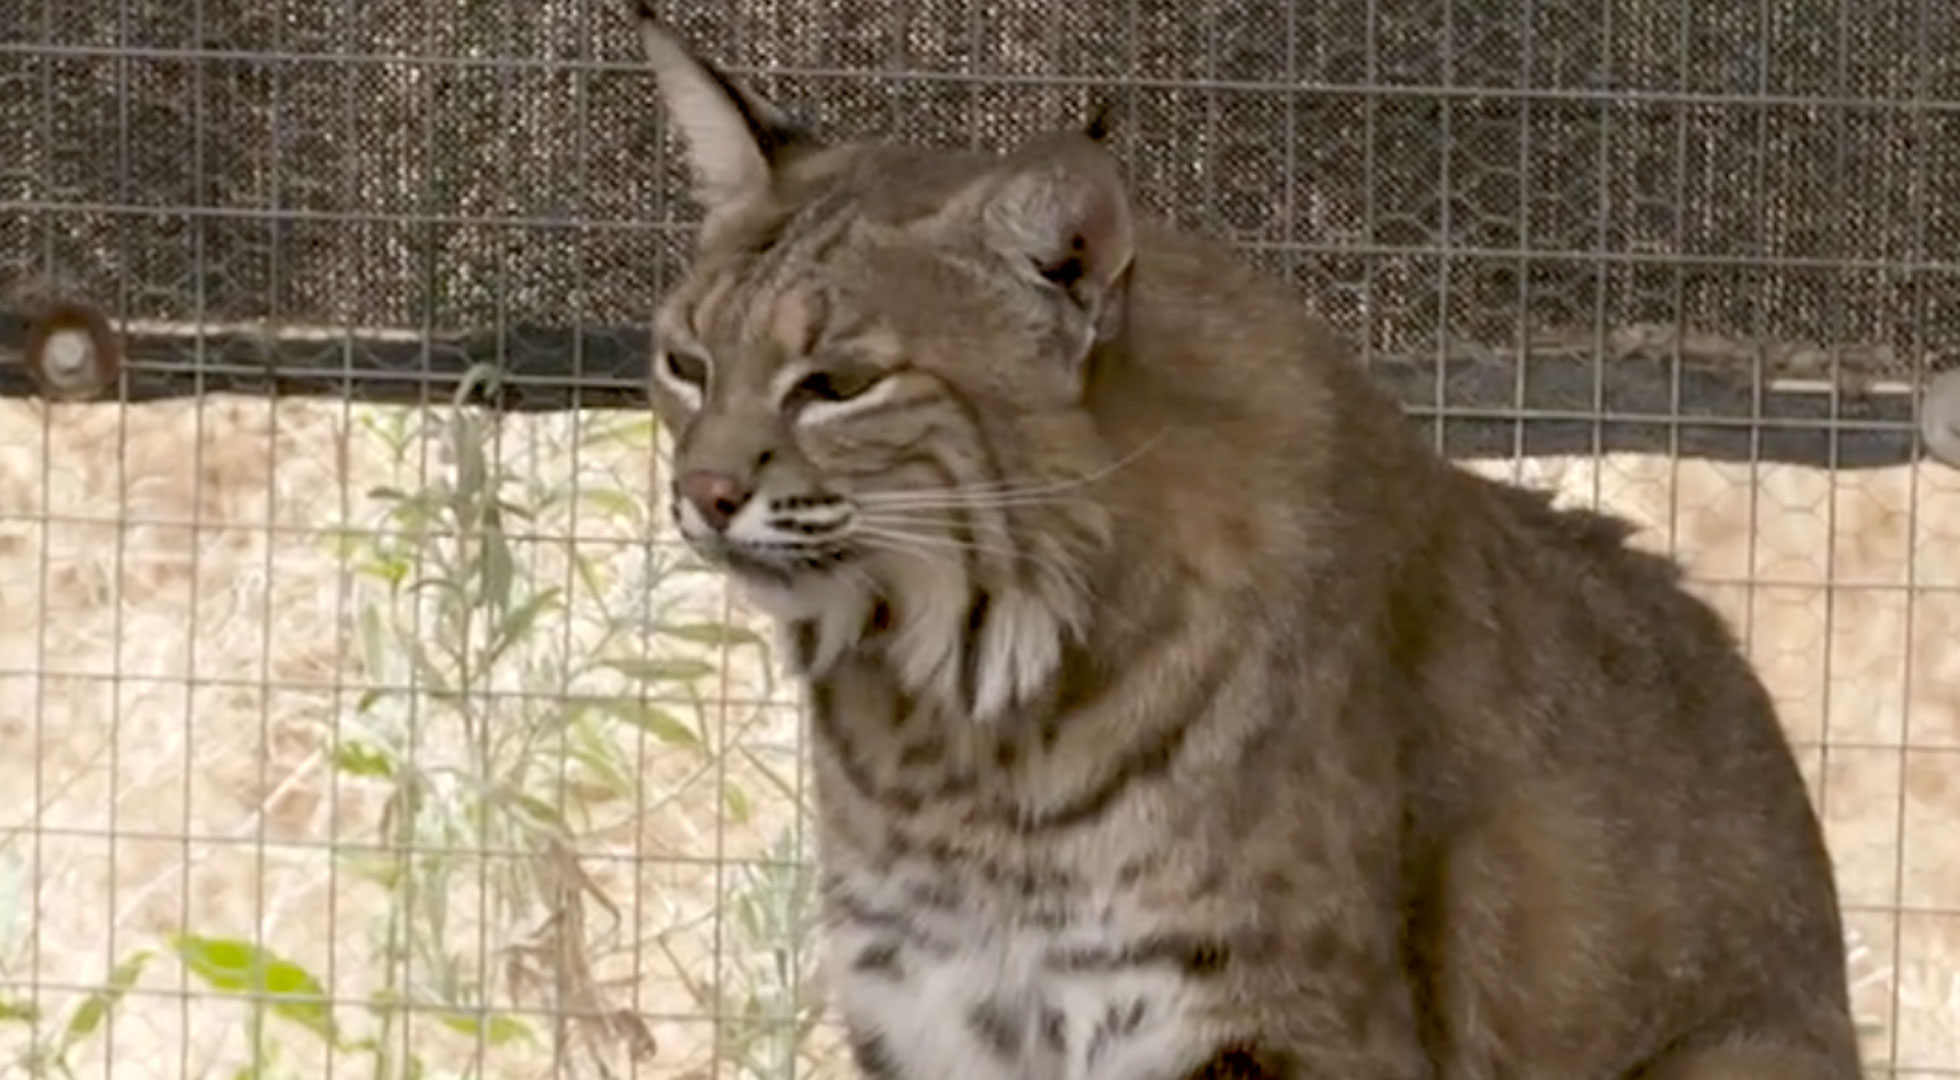 Bobcats are relatively common mammals in Arizona and many other states. 